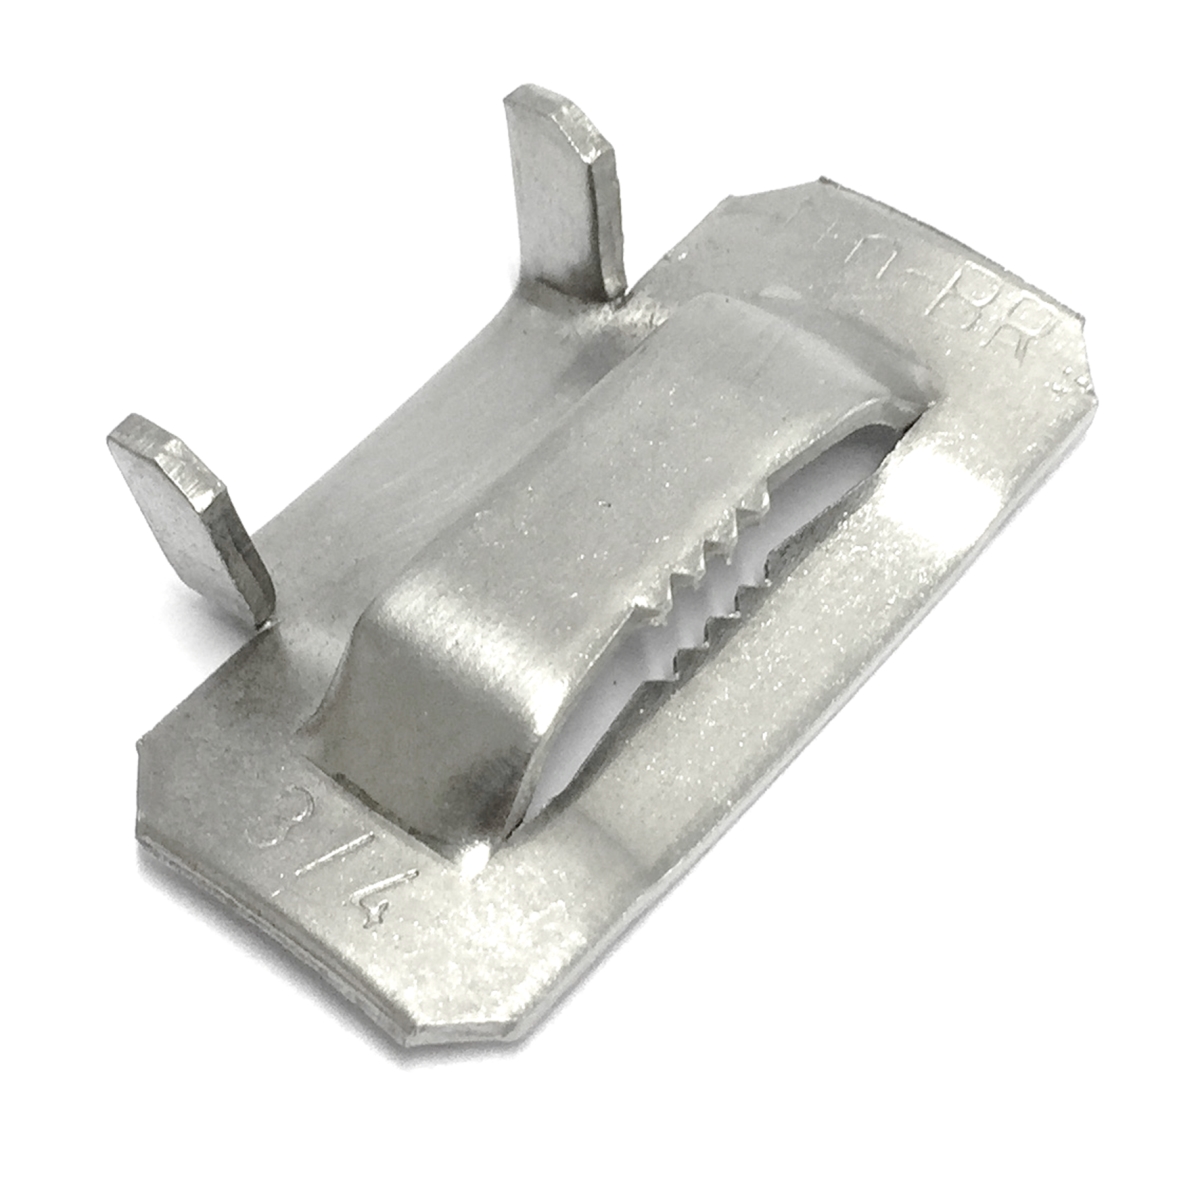 Picture of Fechometal USA FDT7219018NFMT 3 to 4 in. 201 Stainless Steel Ear-Lokt Banding Buckles